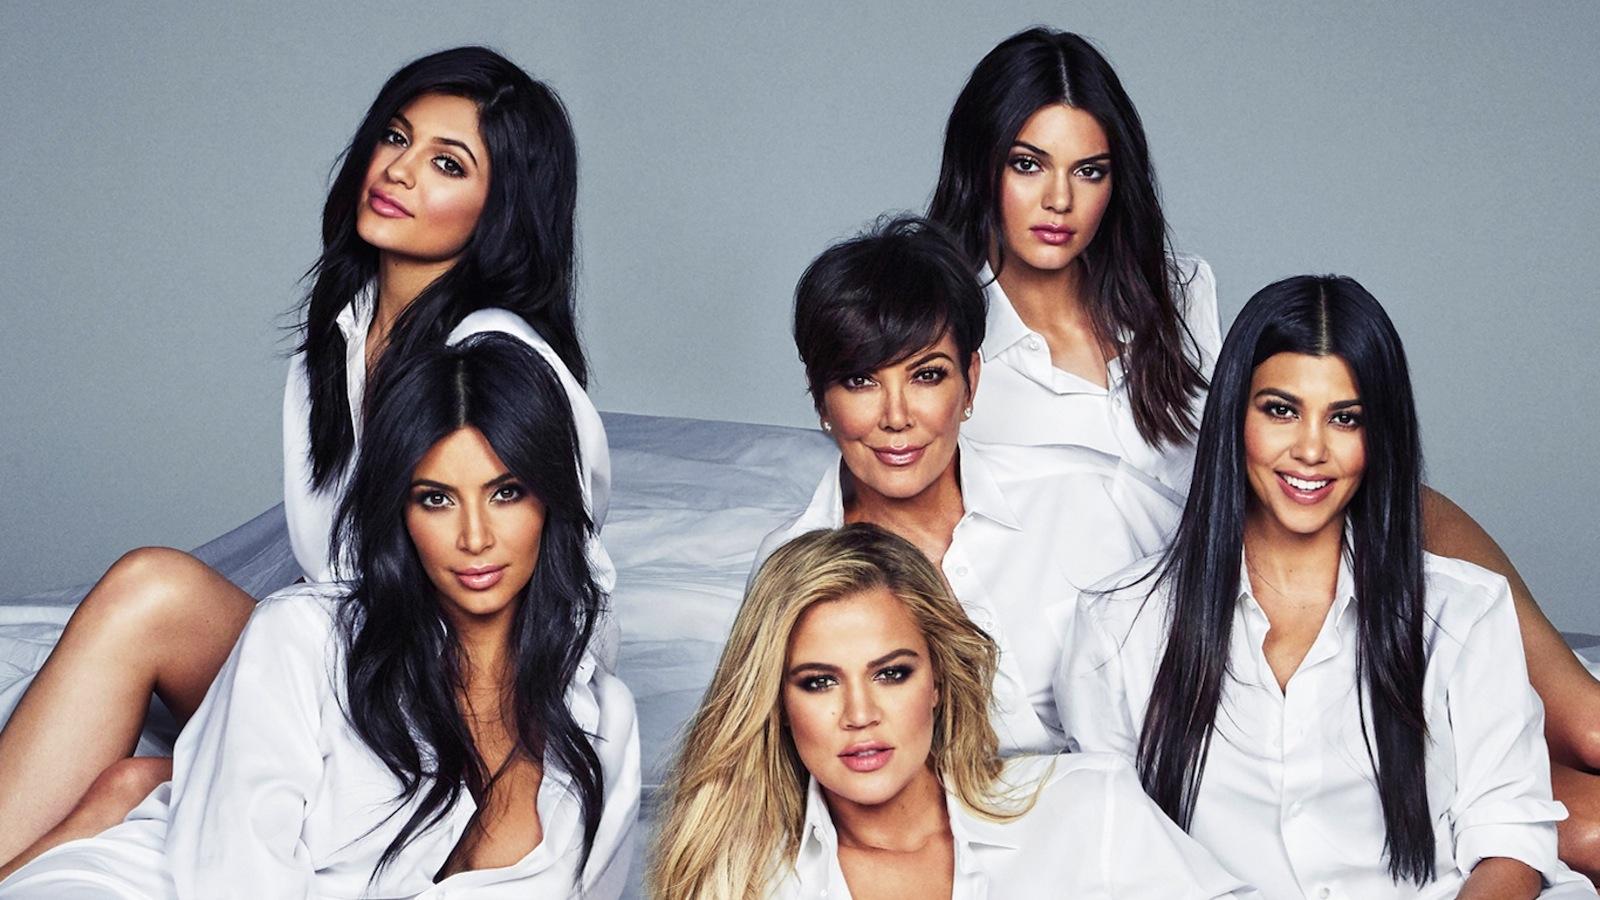 A Keeping Up With the Kardashians Movie Is In The Works.